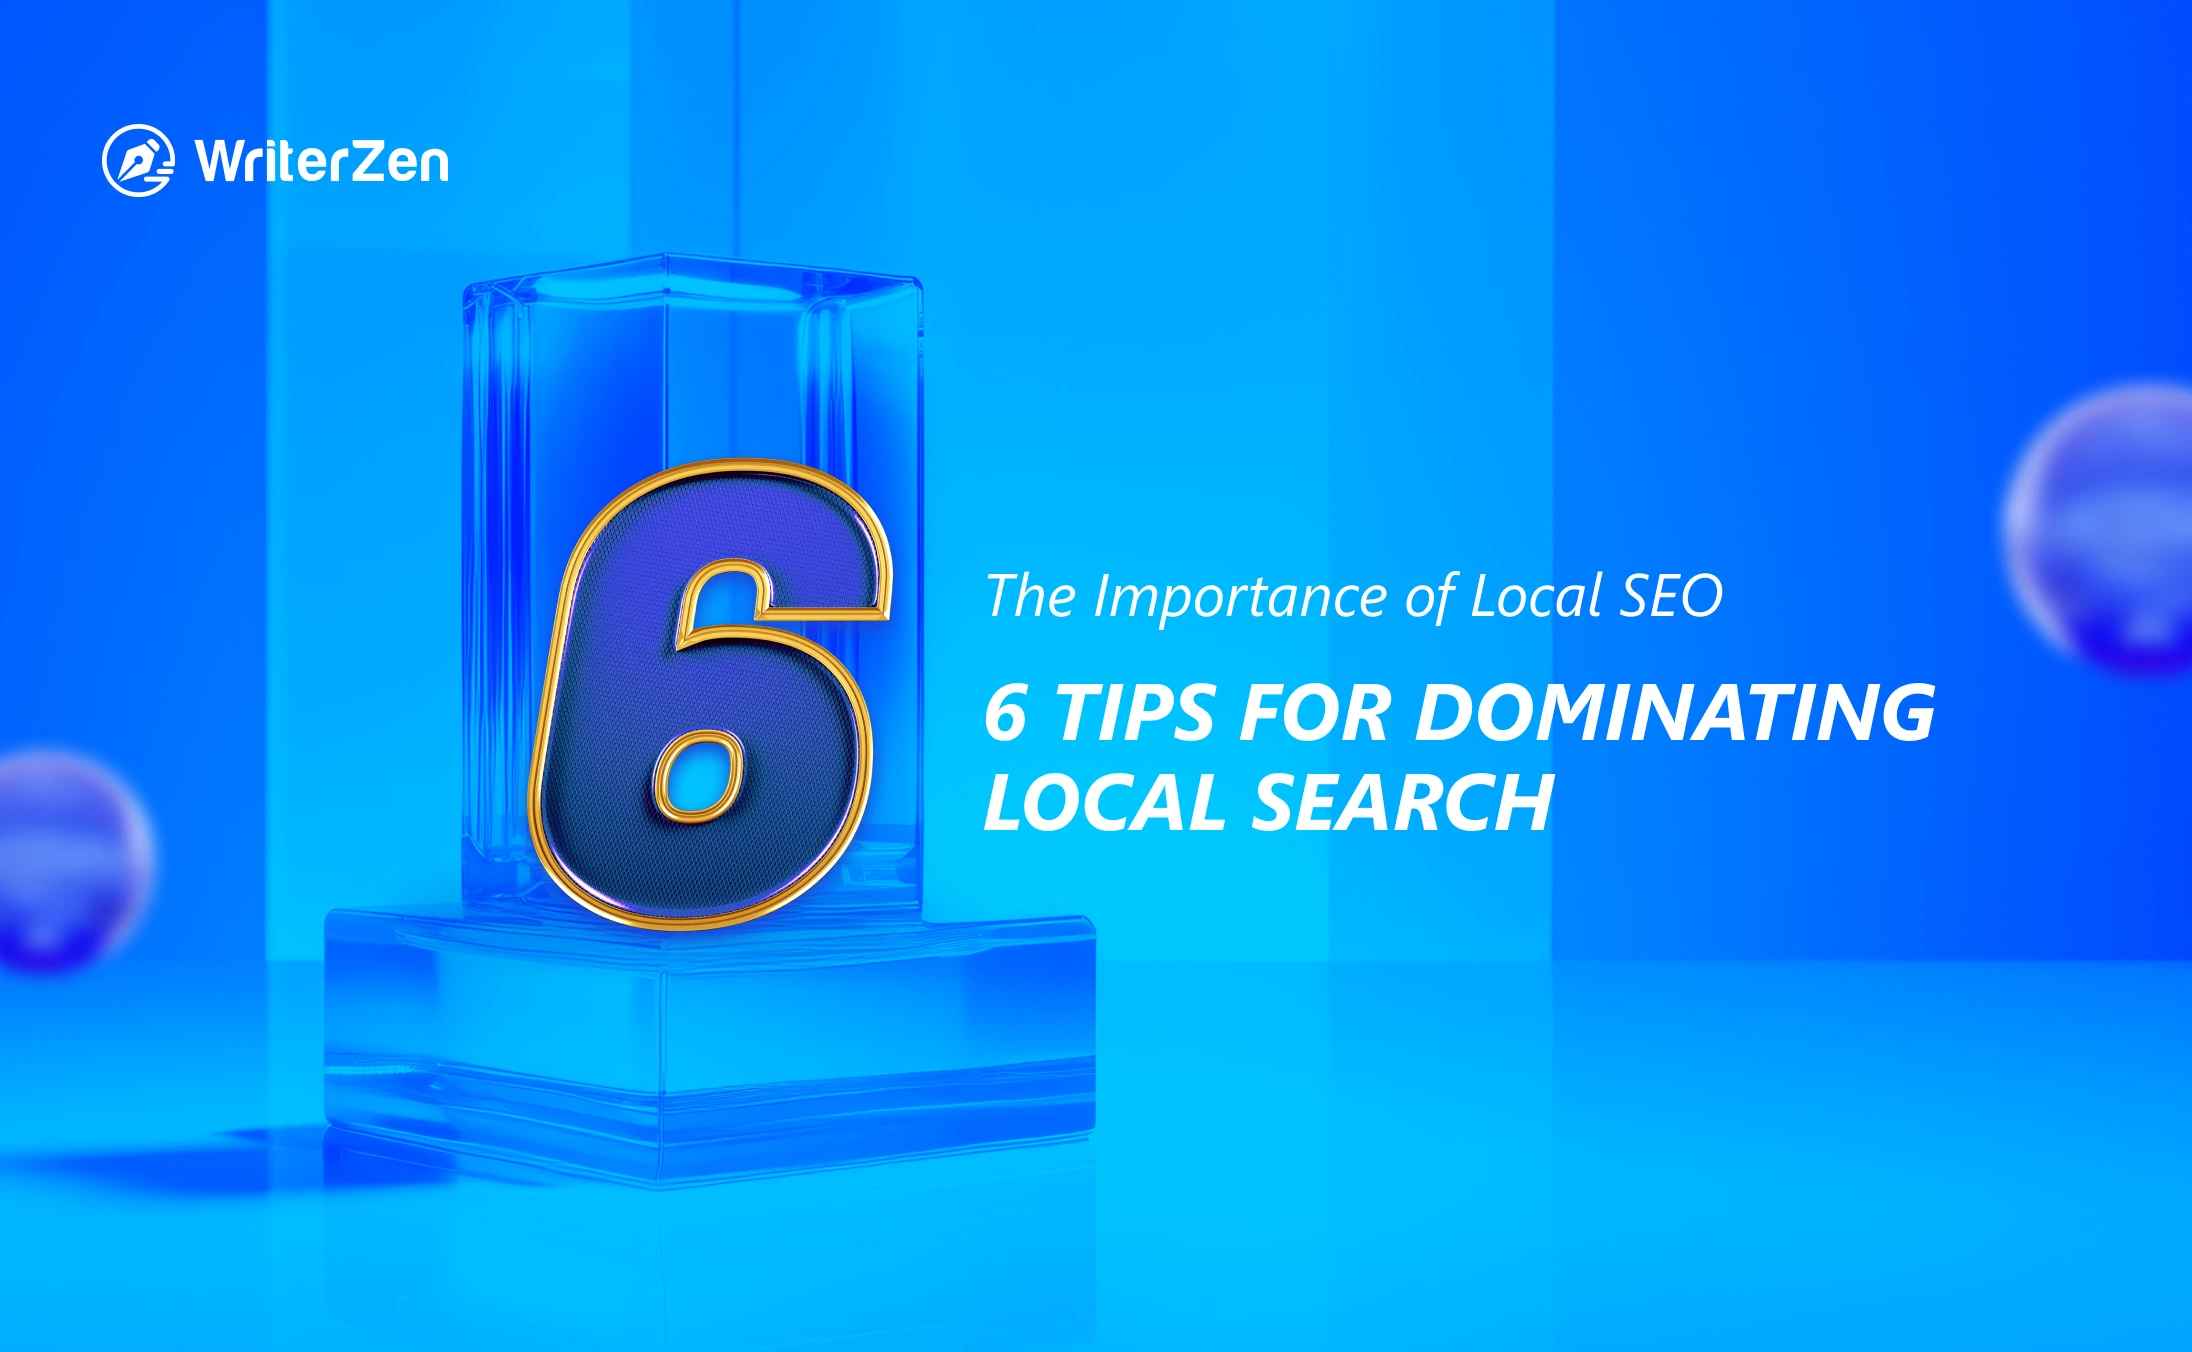 /storage/photos/1/blog-5.50/the-importance-of-local-seo-6-tips-for-dominating-local-search.webp